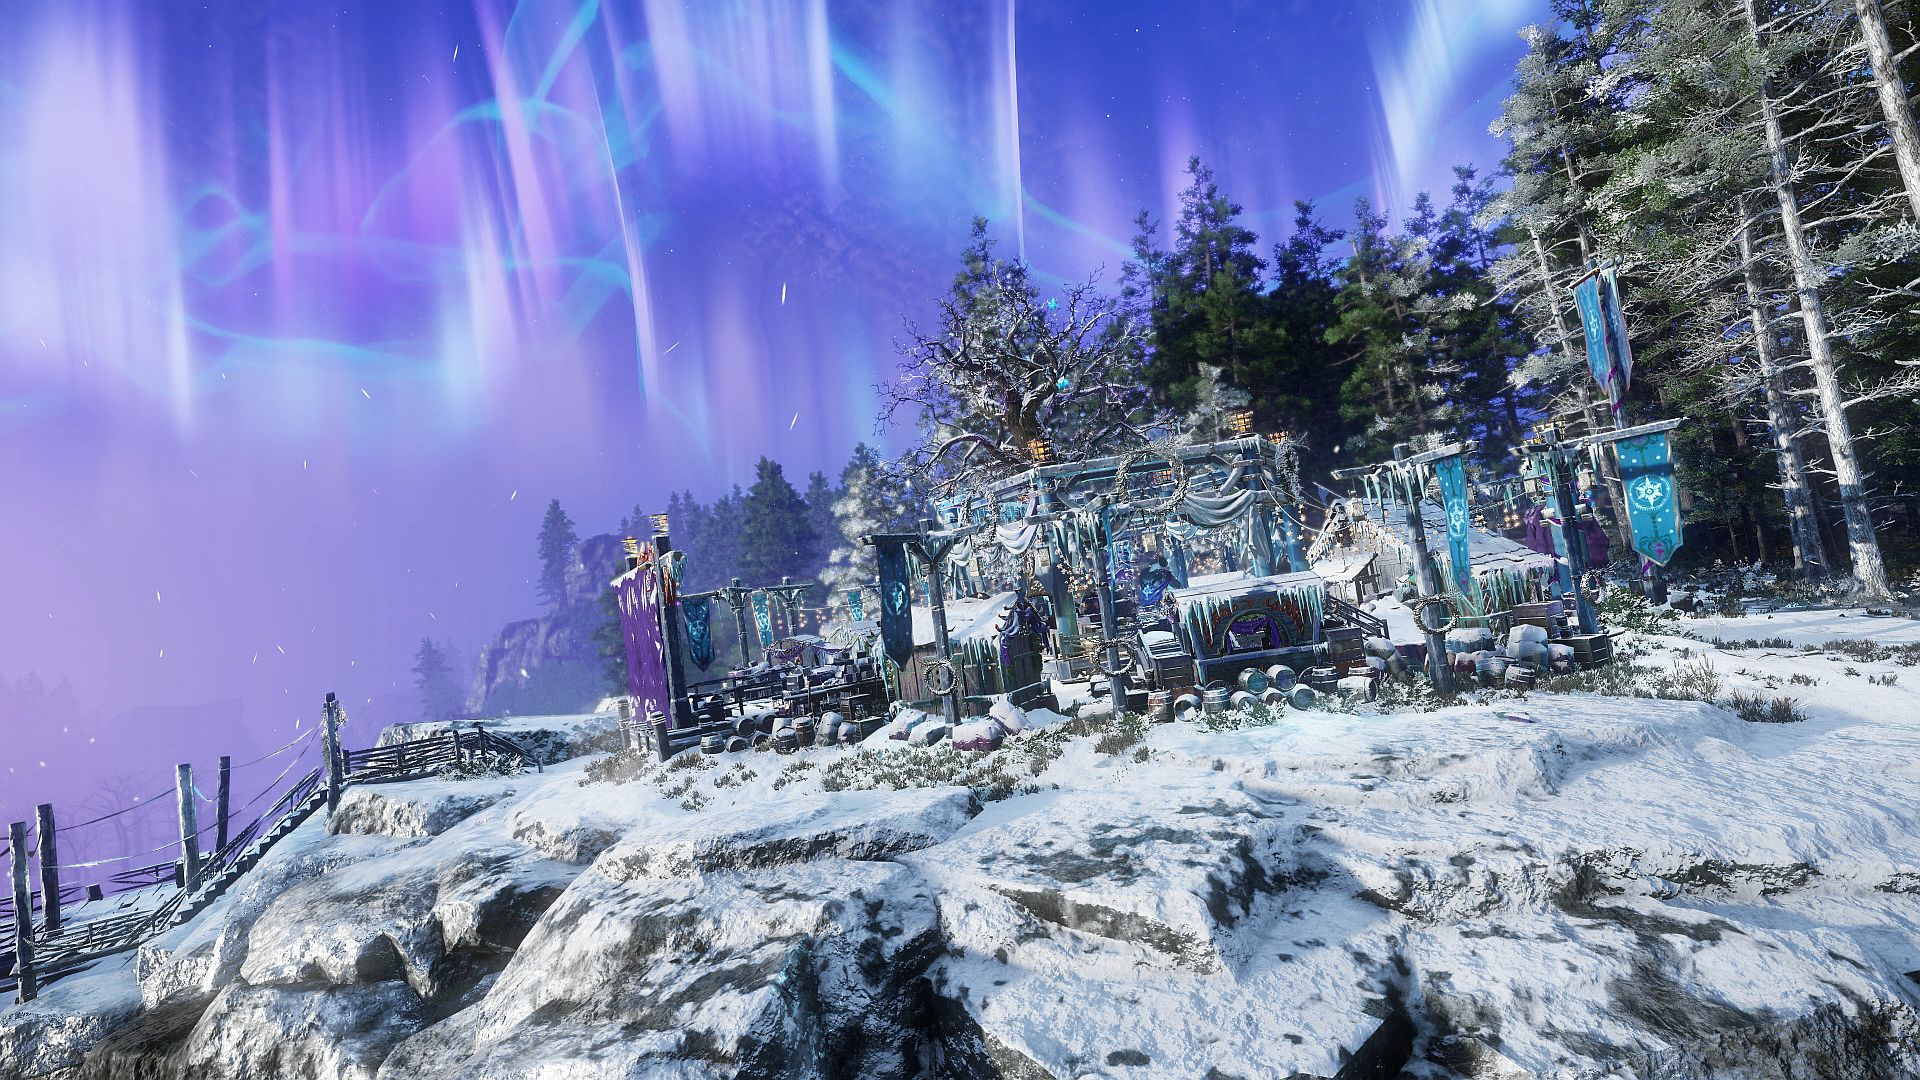 Winter Convergence Festival Update - Releases